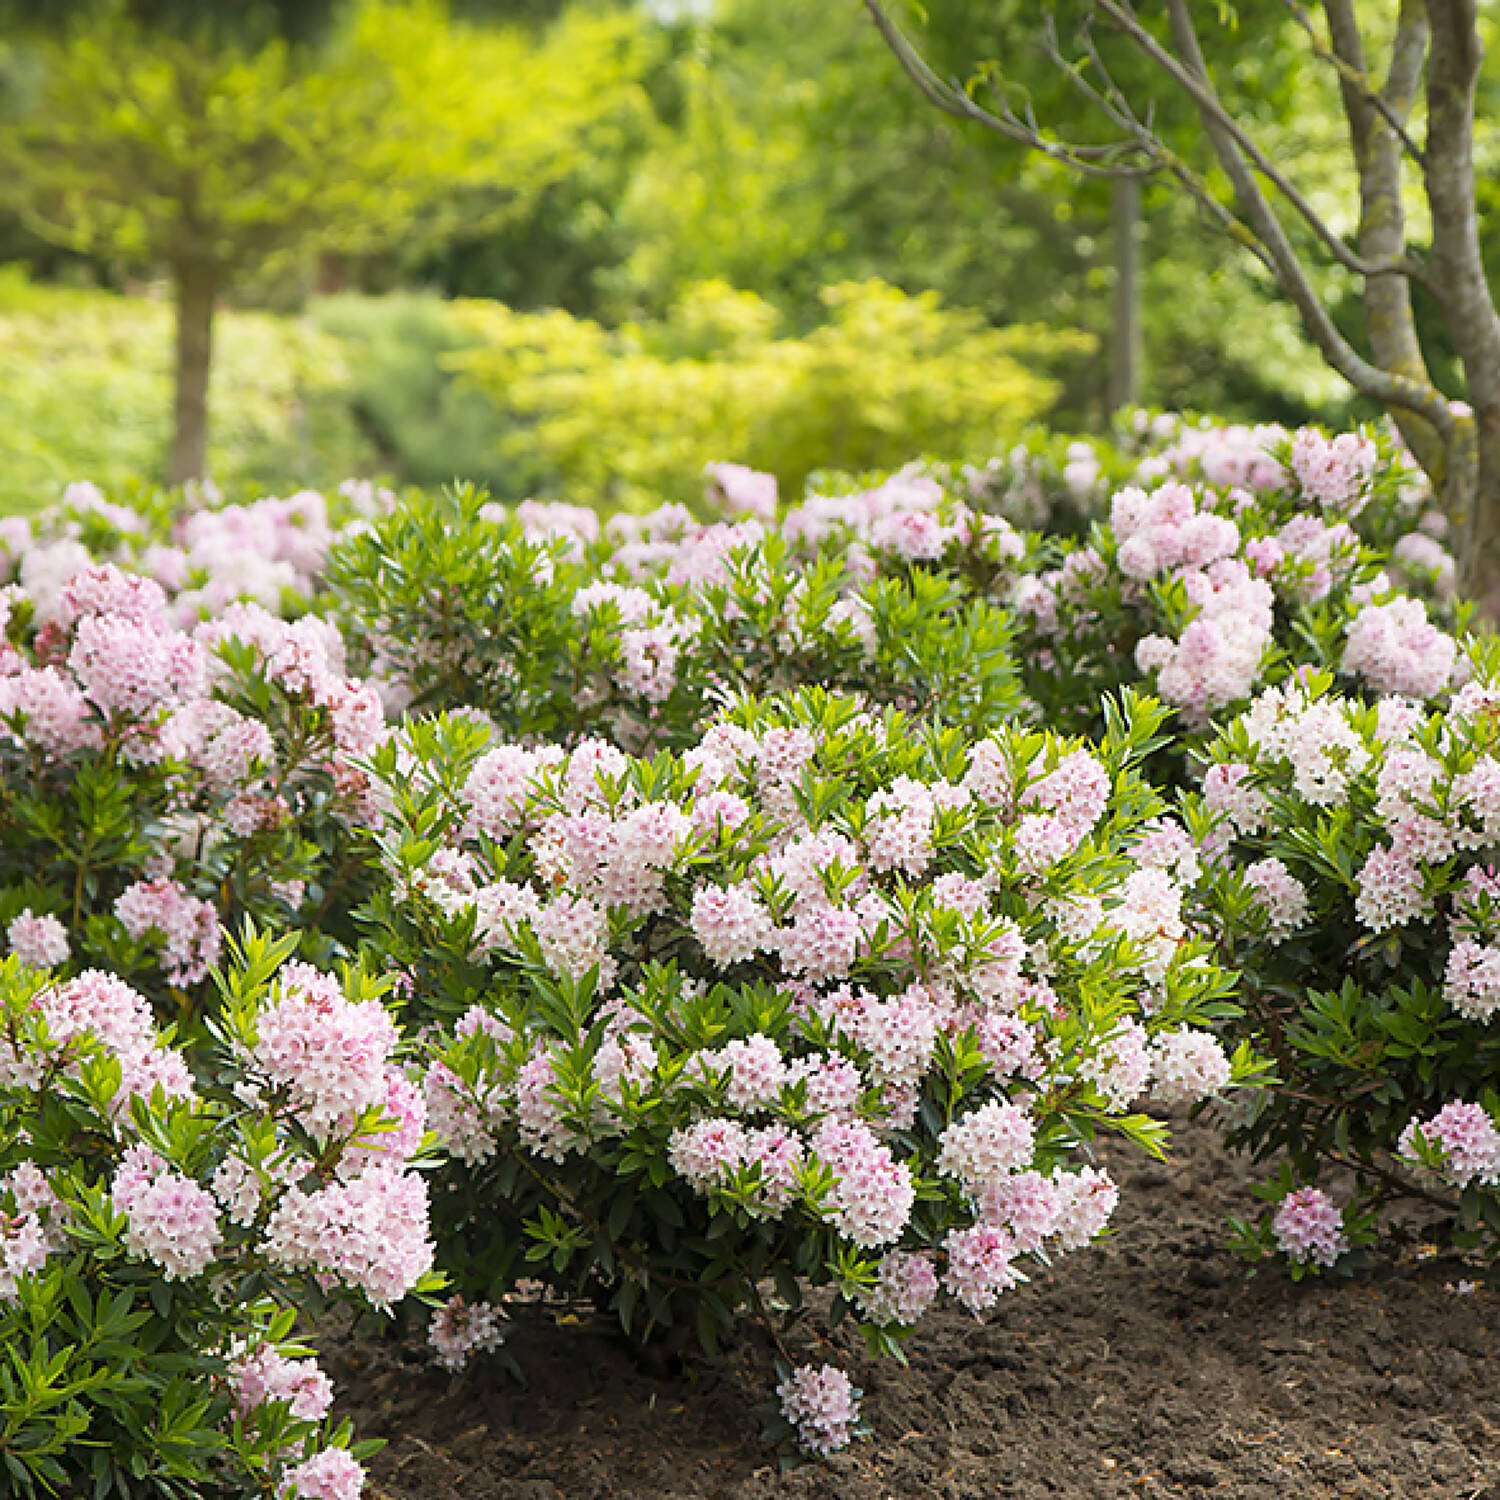 Kategorie <b>Hecken </b> - Rhododendron 'Bloombux'® - Rhododendron micranthum 'Bloombux'®